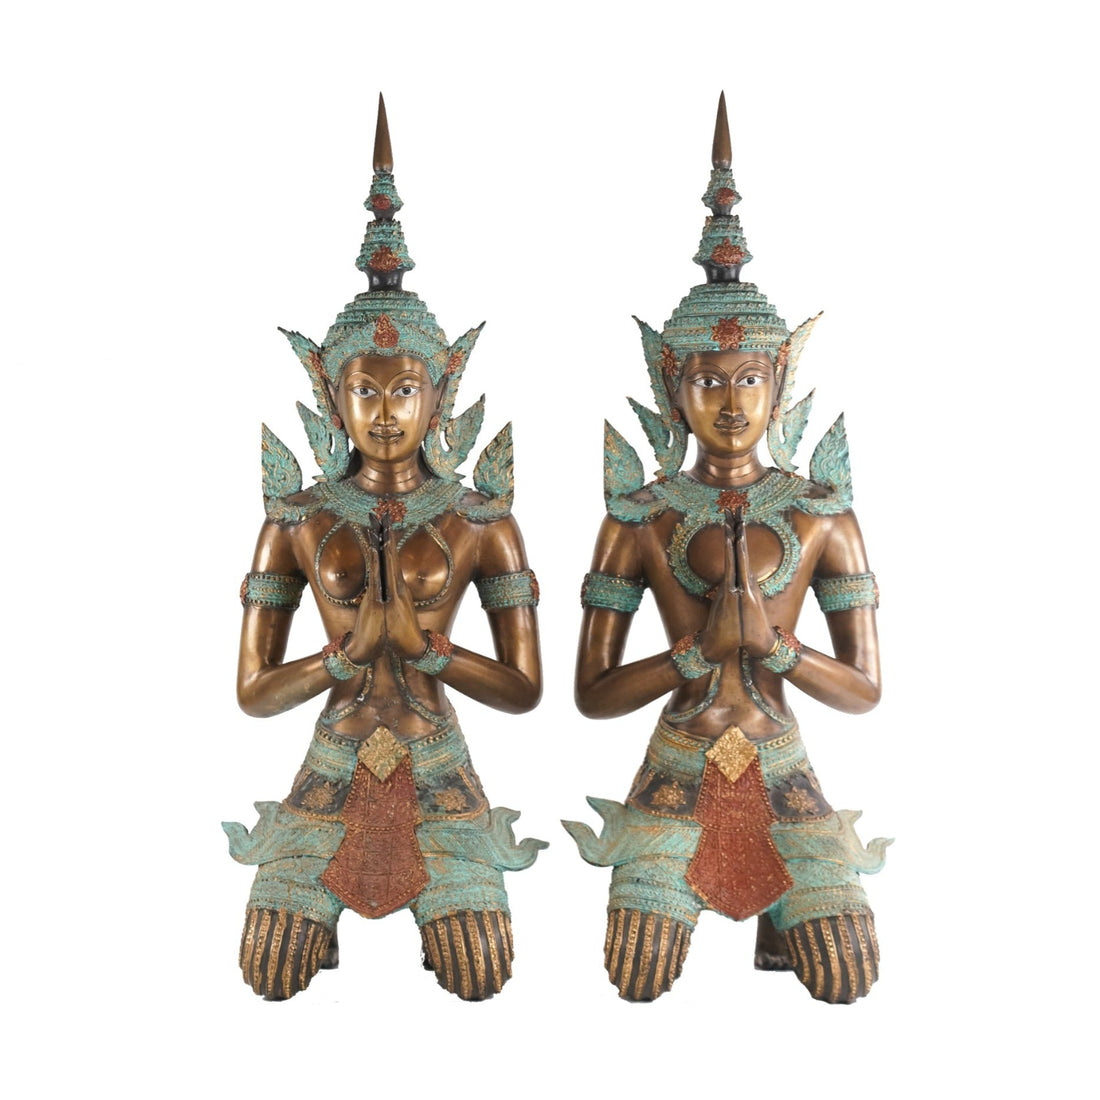 Large Pair of Antique Bronze Theppanom Buddhist Sculpture - Sirdab - Unknown